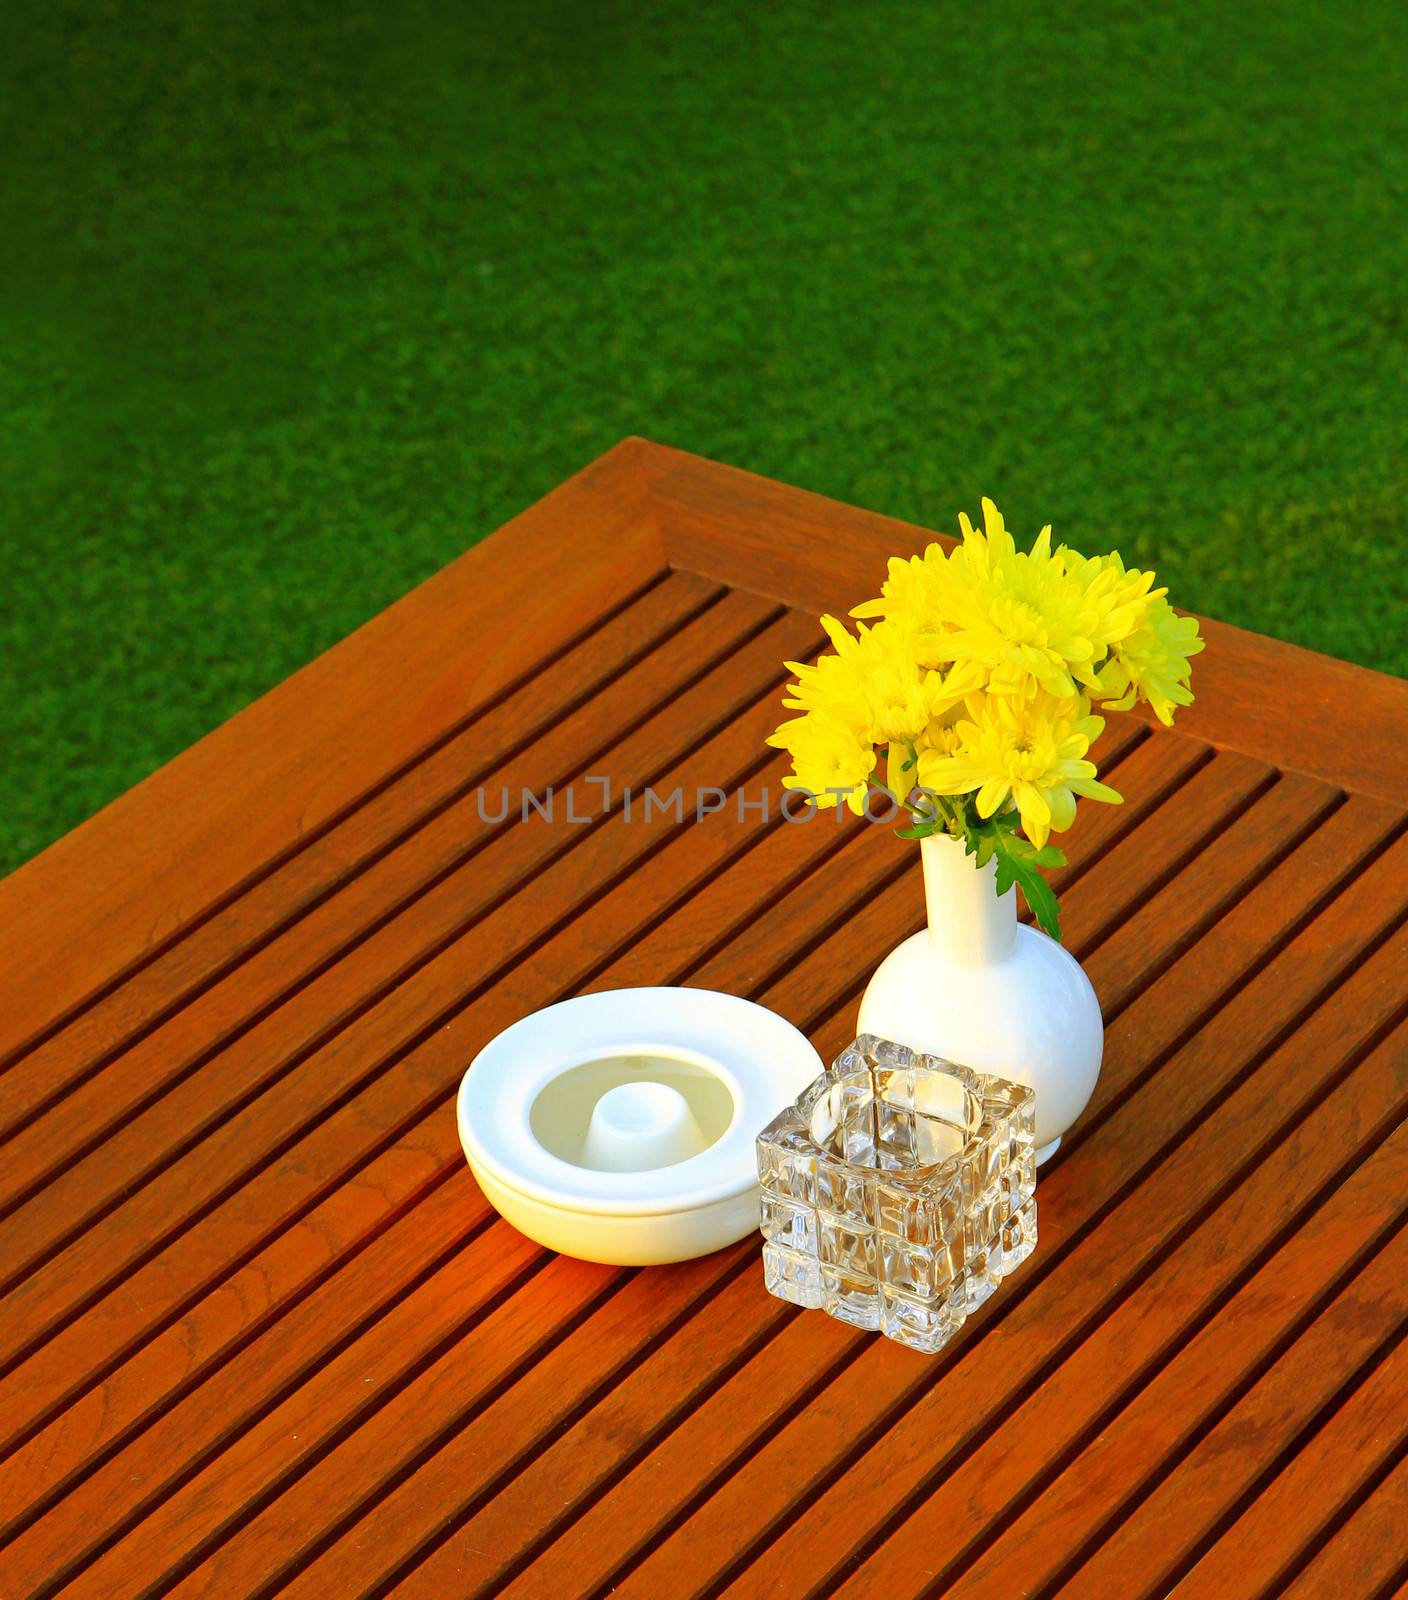 Table setting with flower in outdoor restaurant